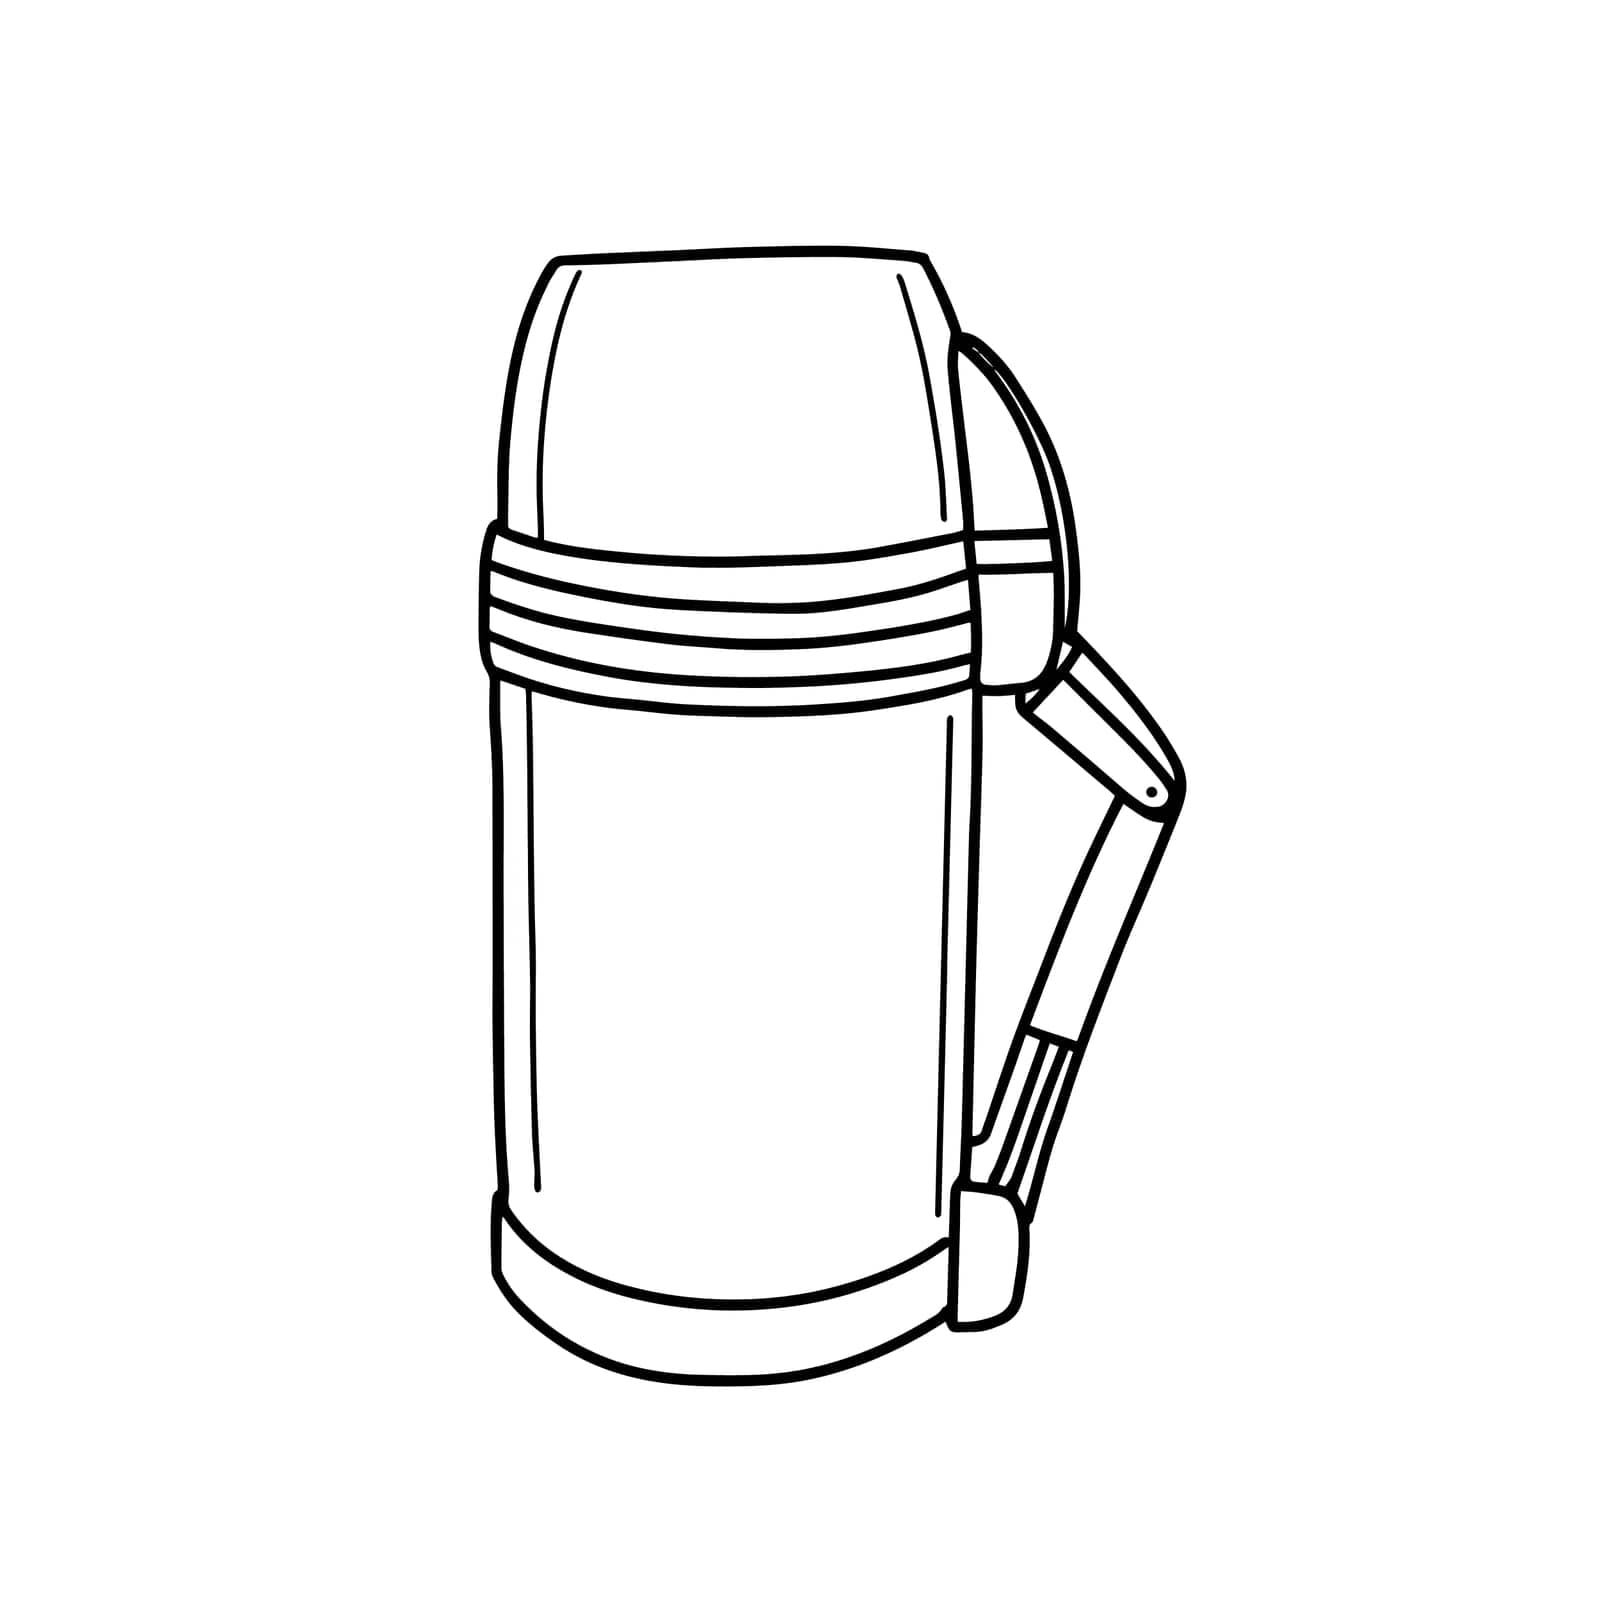 Thermos tourist Hiking. Thermos for tea or coffee. Hand-drawn vector illustration. Vector illustration in doodle style.